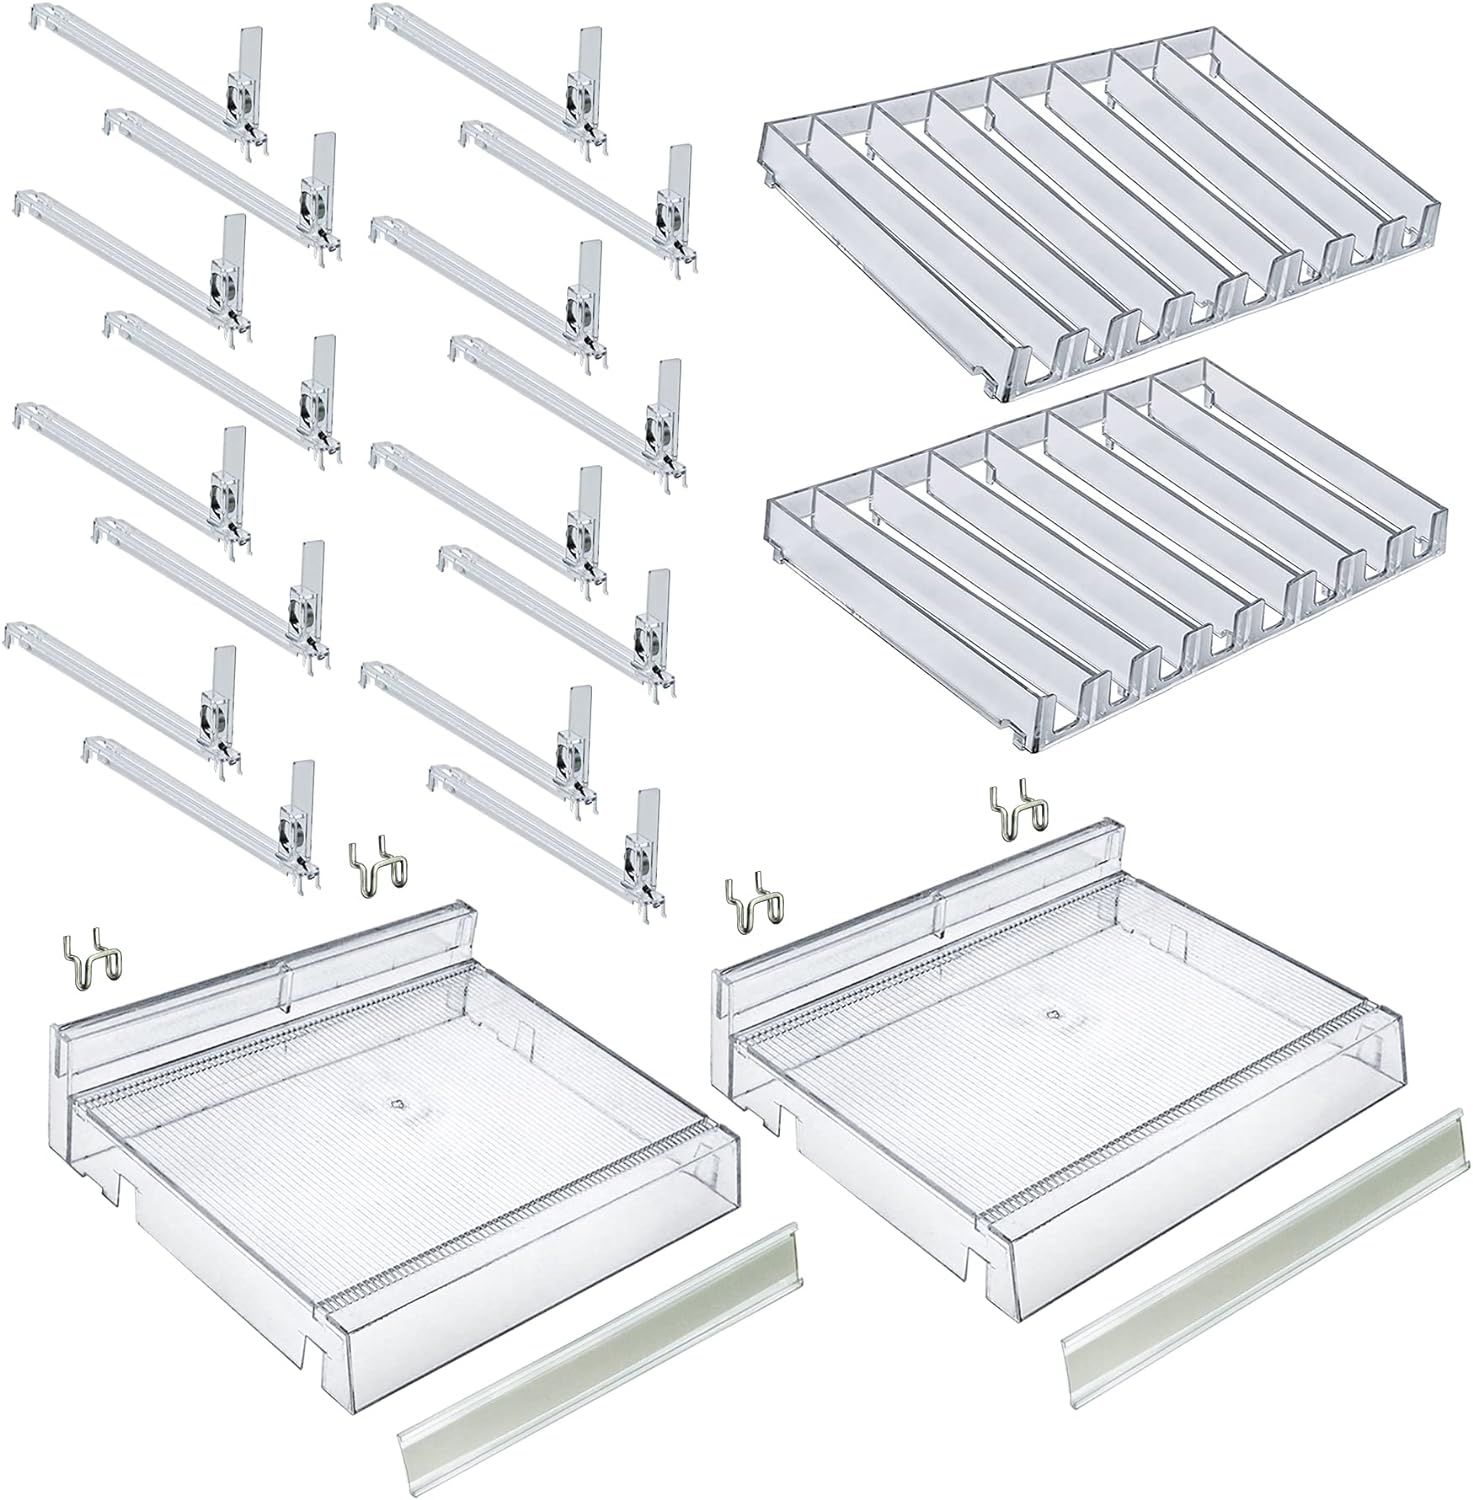 Azar Displays 225830-8COMP-CLR 8 Compartment Divider Bin Cosmetic Tray with Pushers - 8 Slots per Tray, 2-Pack, Clear